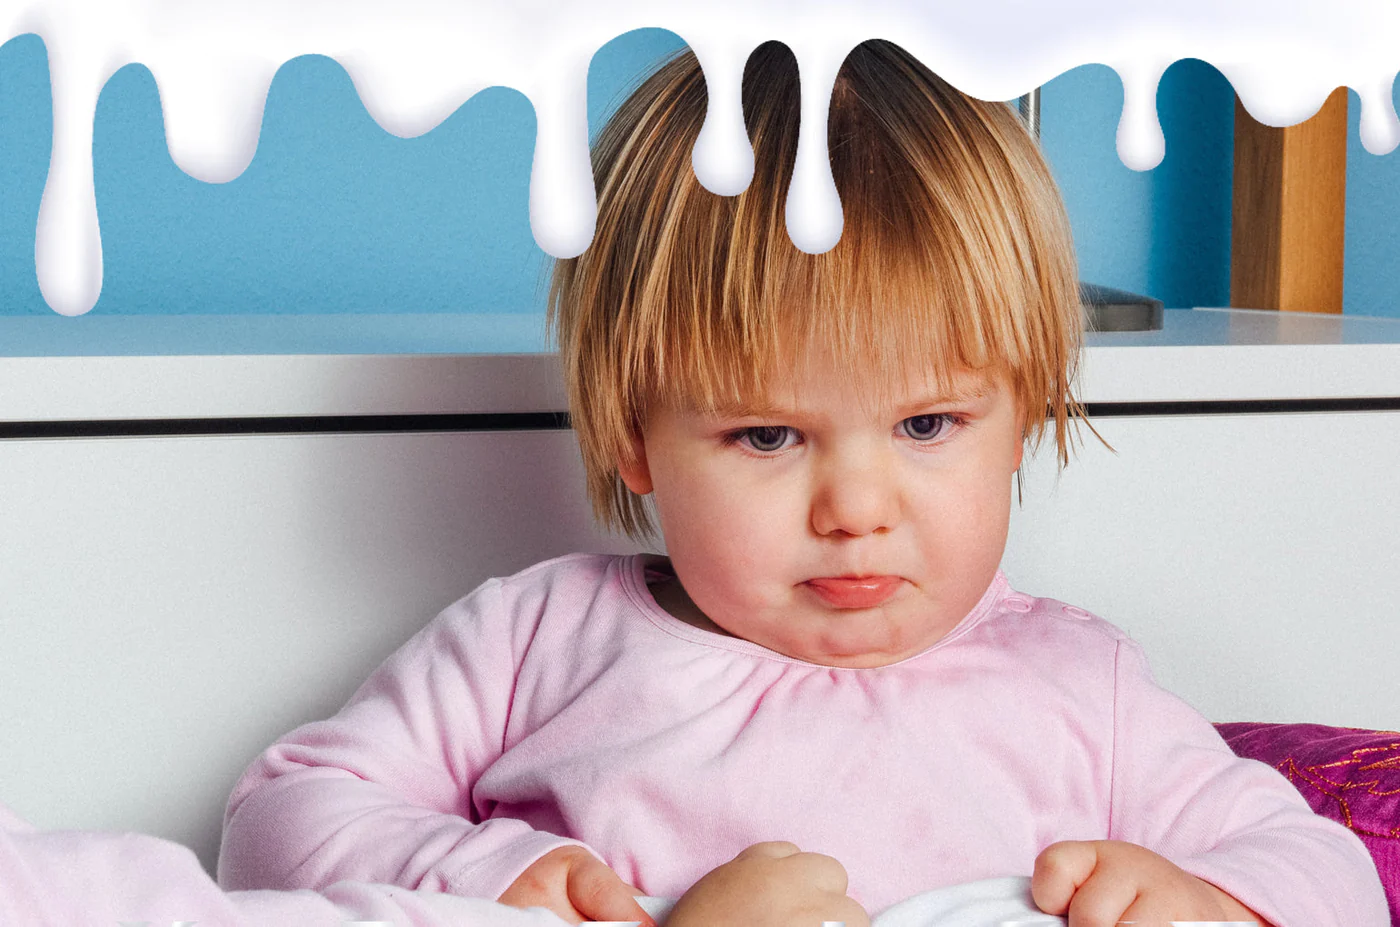 A little girl sitting on a bed - Signs Your Toddler Could Be Lactose Intolerant